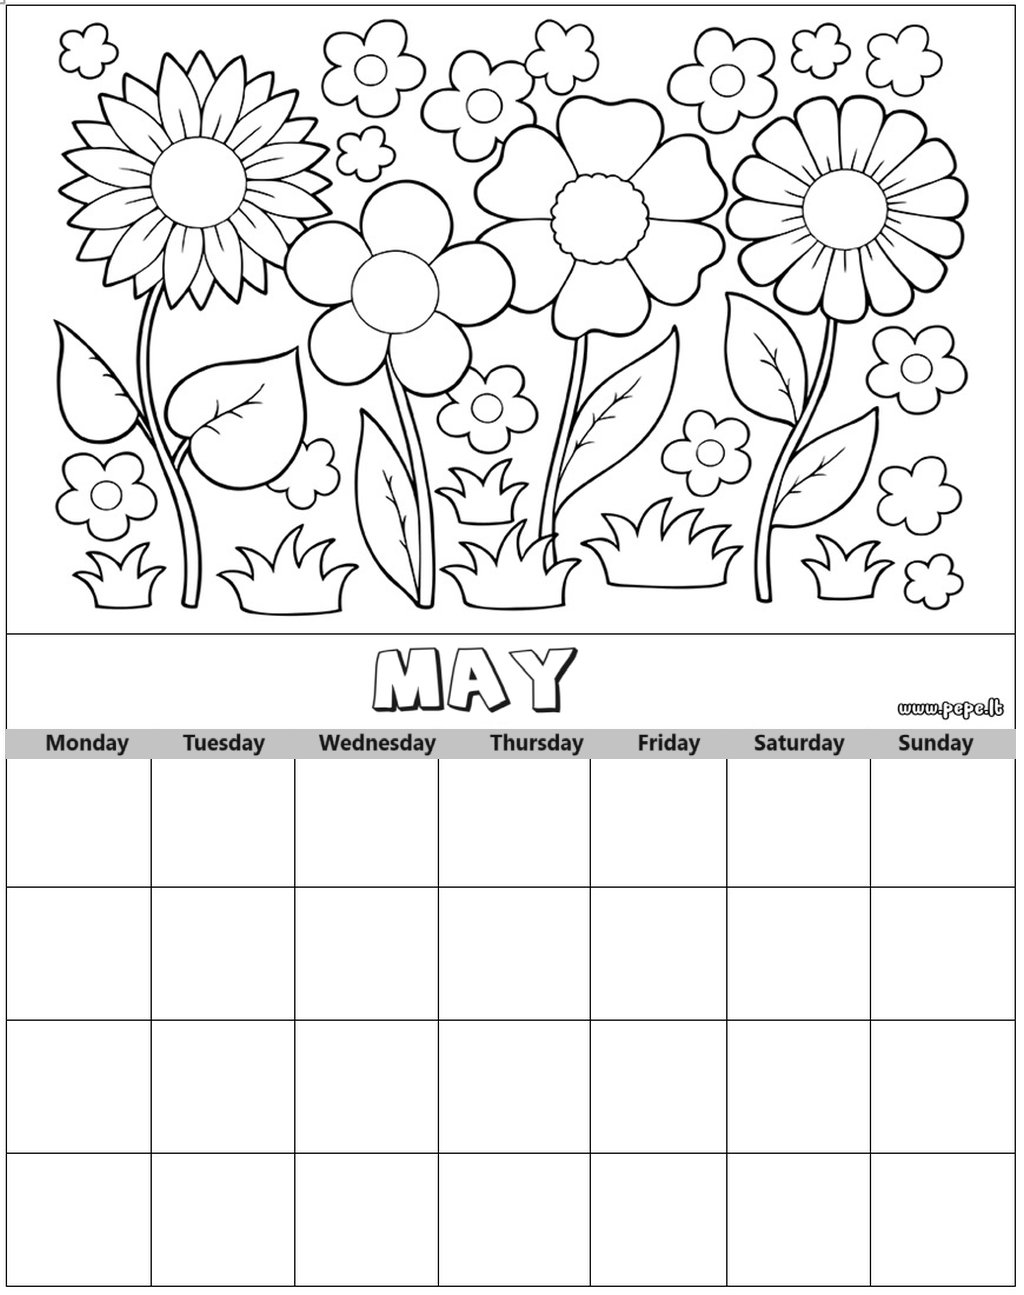 Month MAY calendar coloring